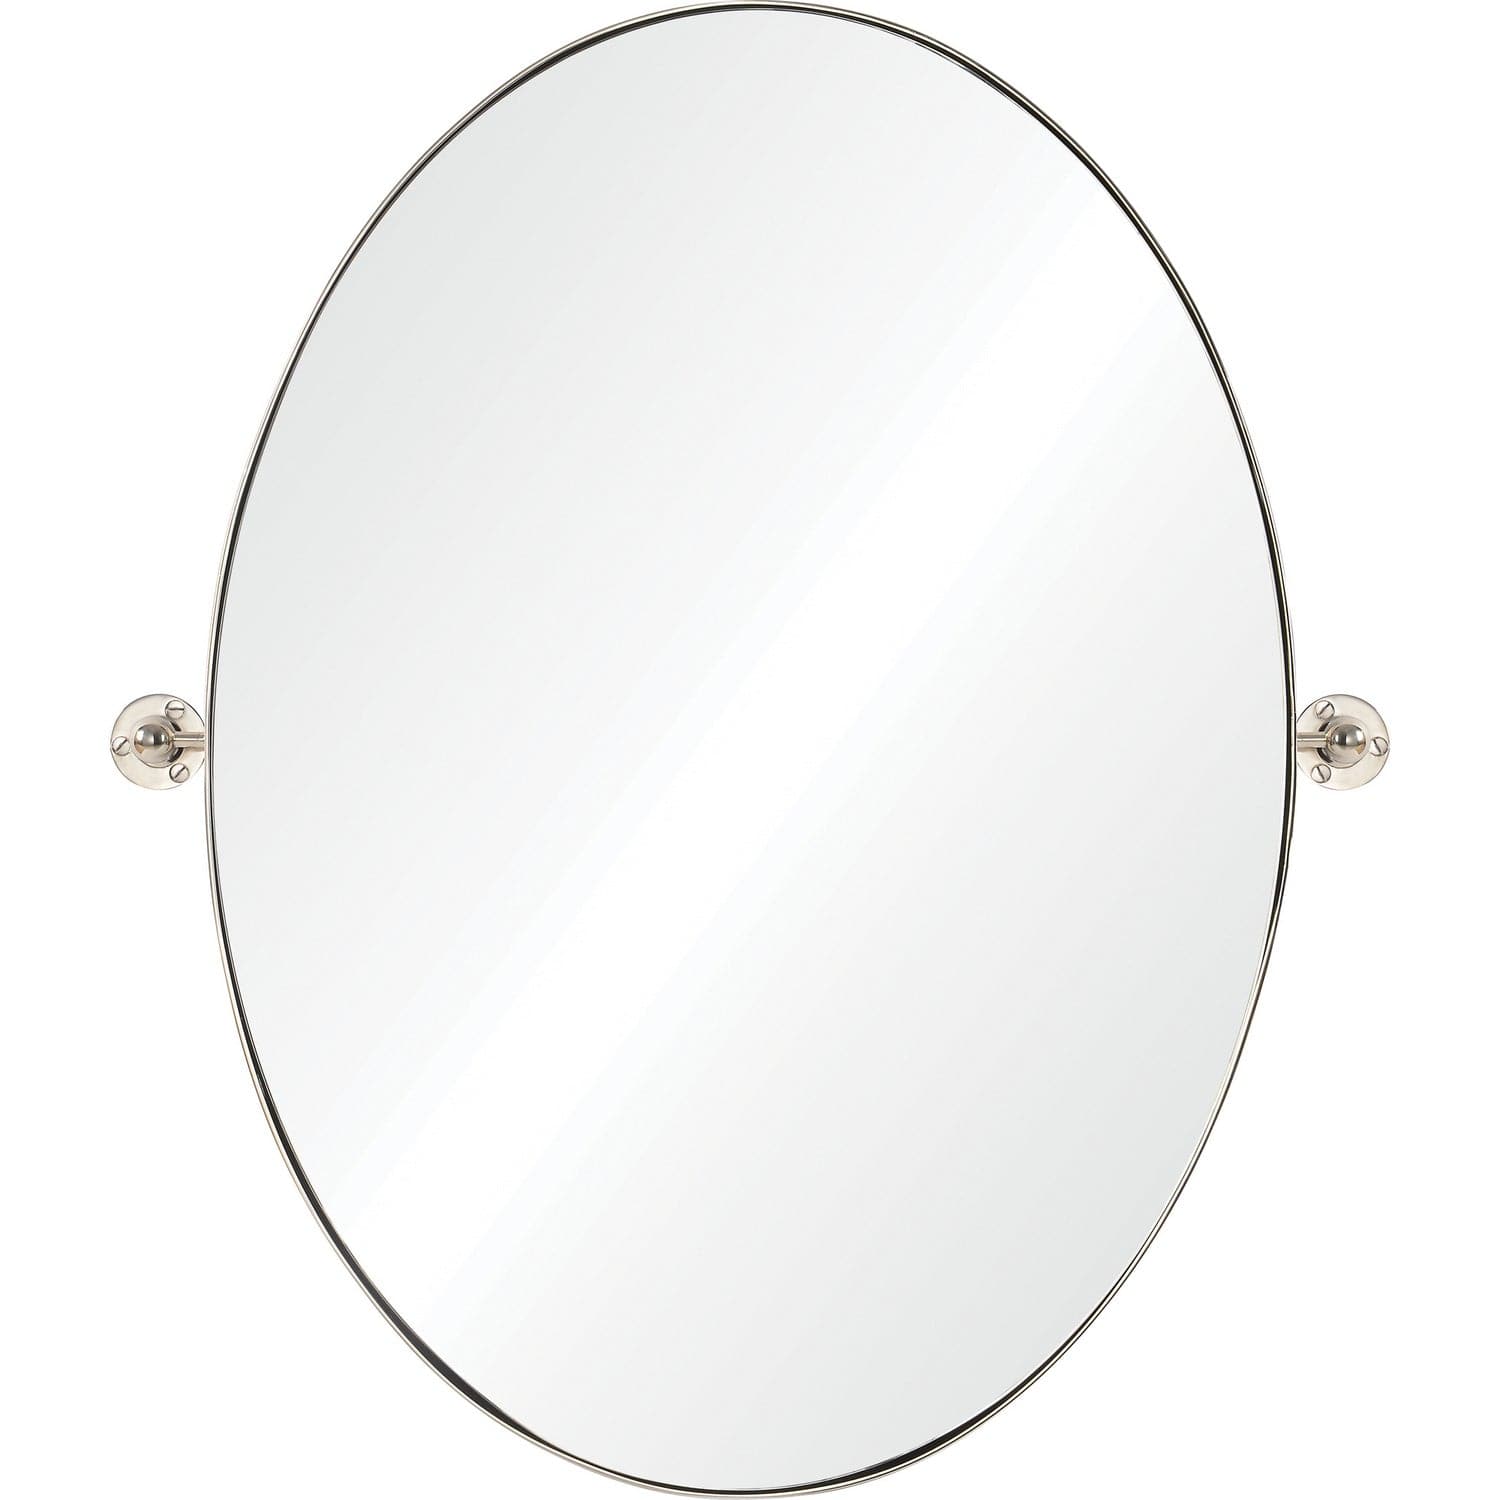 Renwil - MT2353 - Mirrors/Pictures - Mirrors-Oval/Rd.